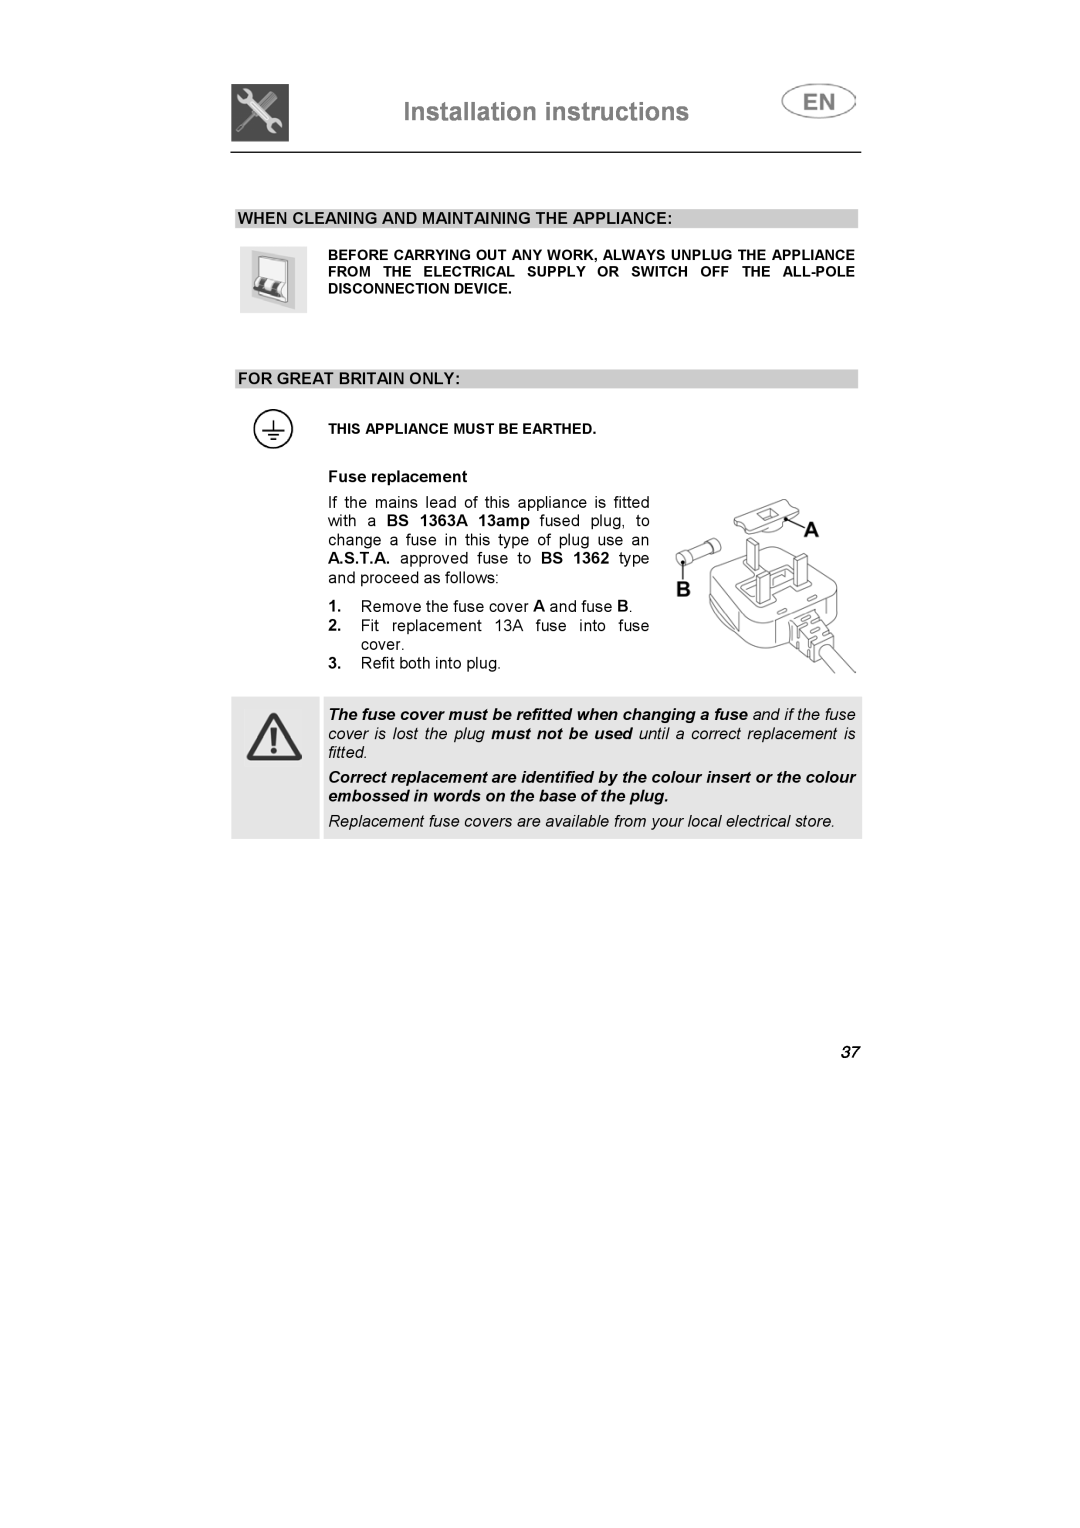 Smeg STA613 Installation instructions, When Cleaning And Maintaining The Appliance, For Great Britain Only 